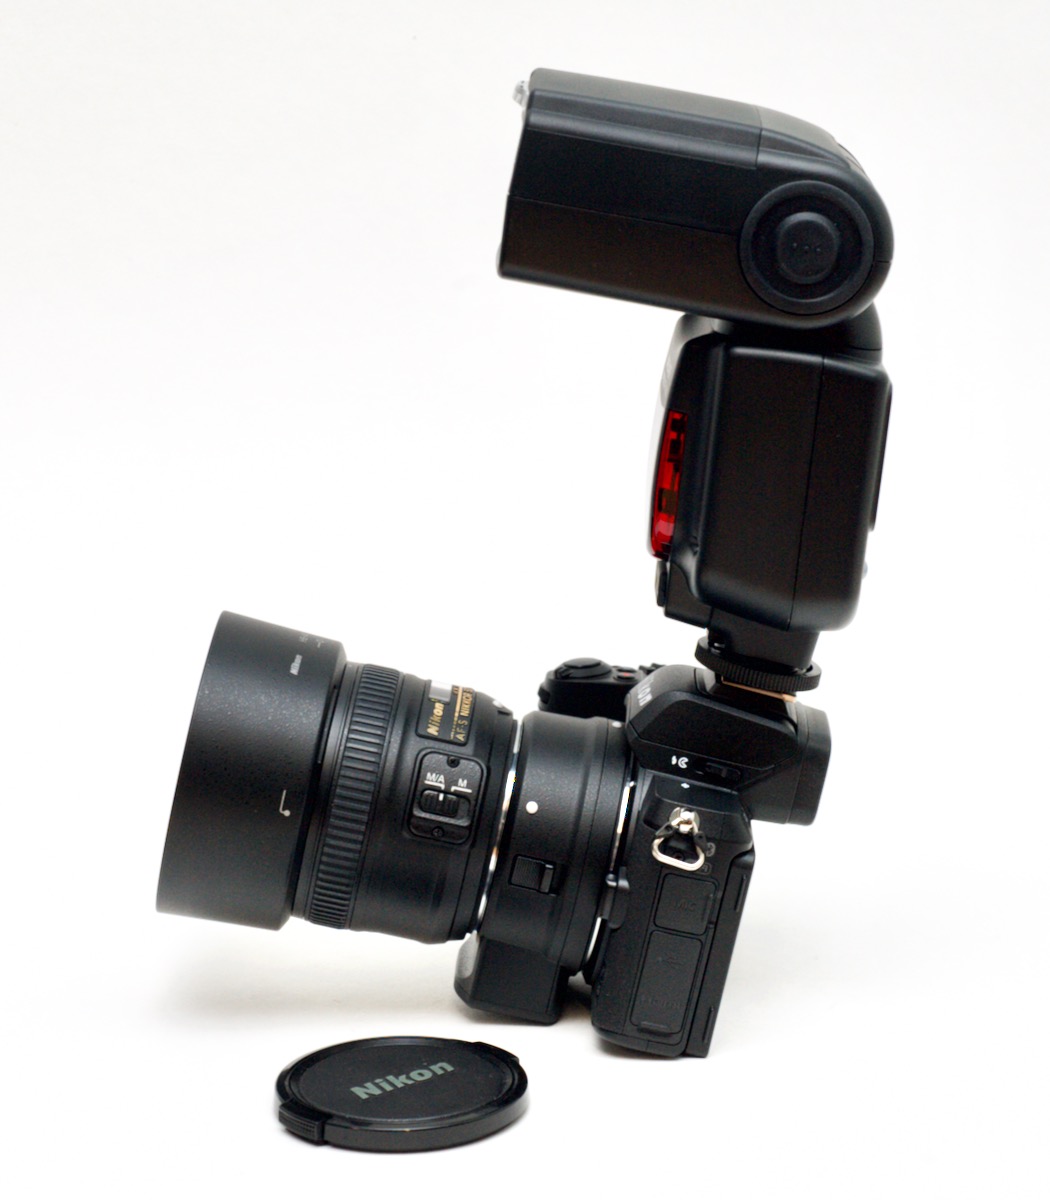 Z50 balance issues with FTZ adapter and 50mm lens and flash strobe